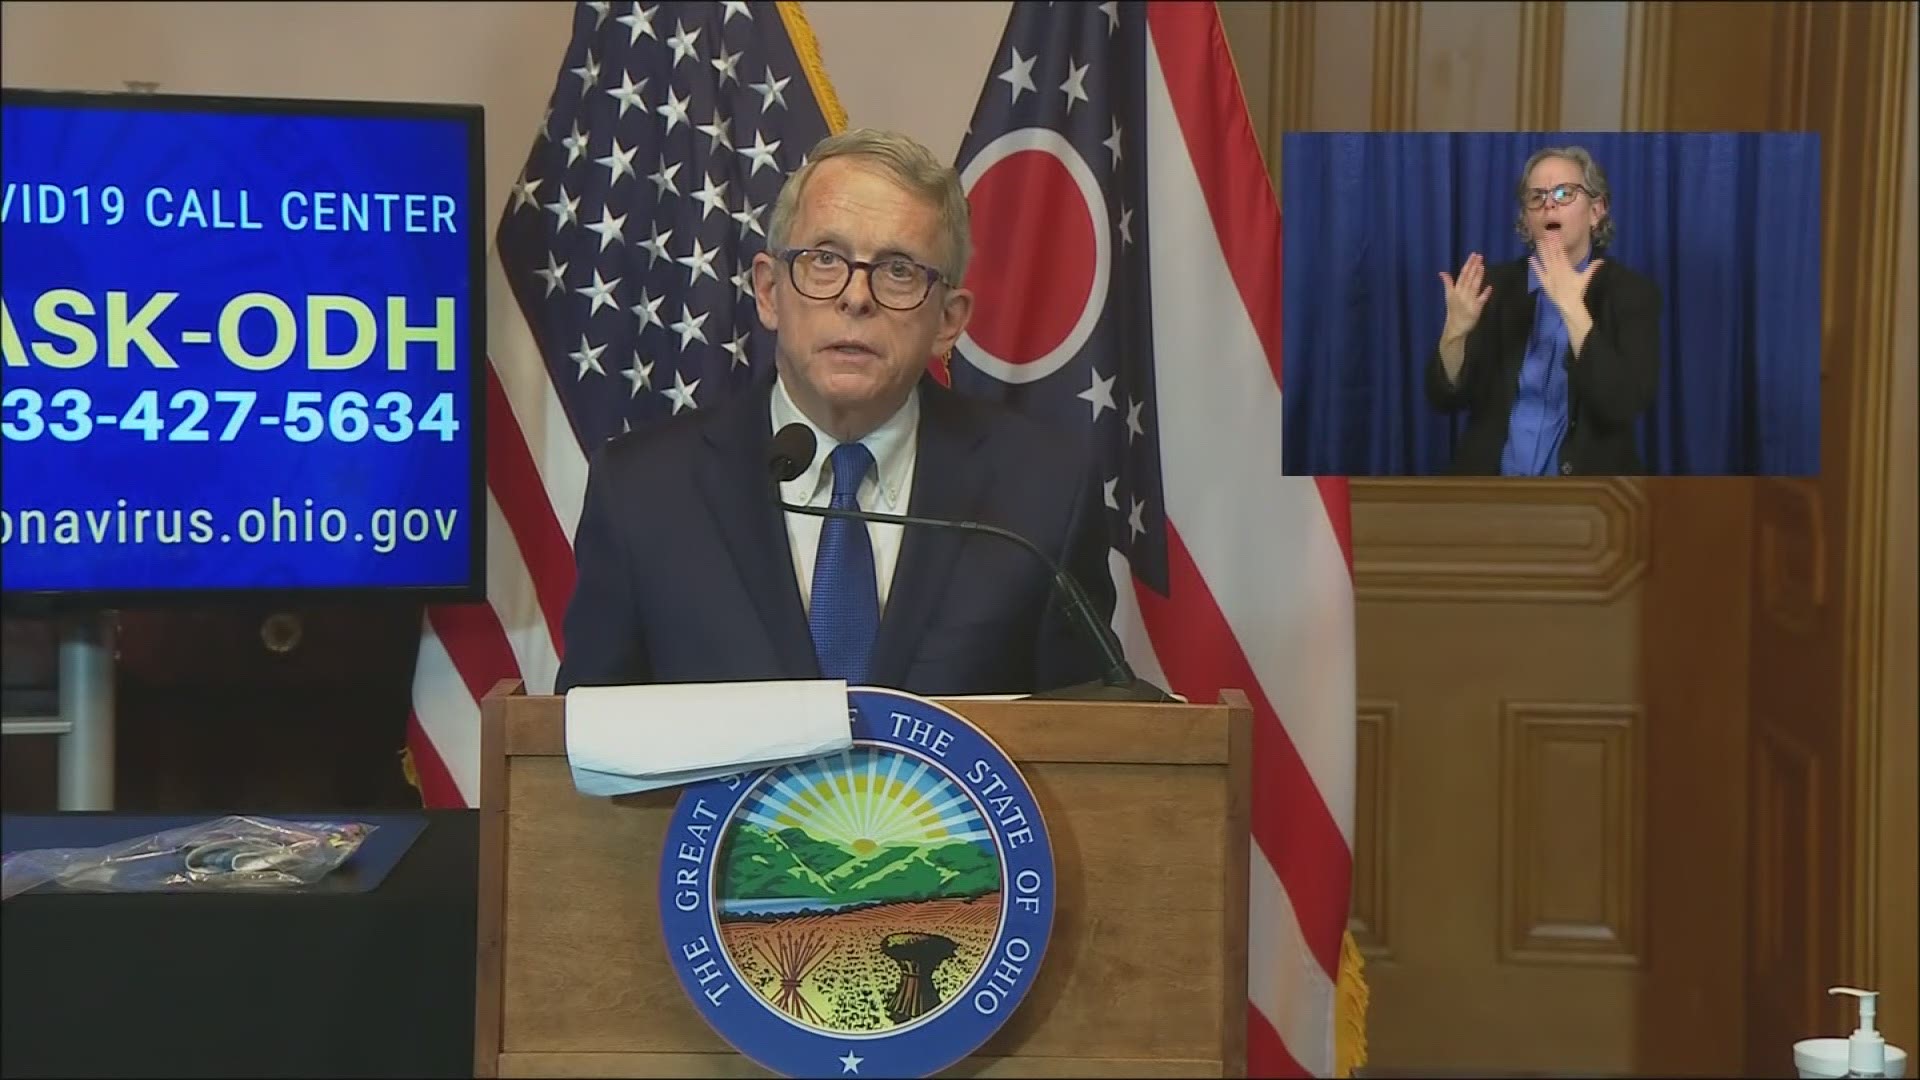 Please stay home!  Governor Mike DeWine announced on Thursday that Ohio a new issue has been ordered to extend the state's stay-at-home order until May 1.